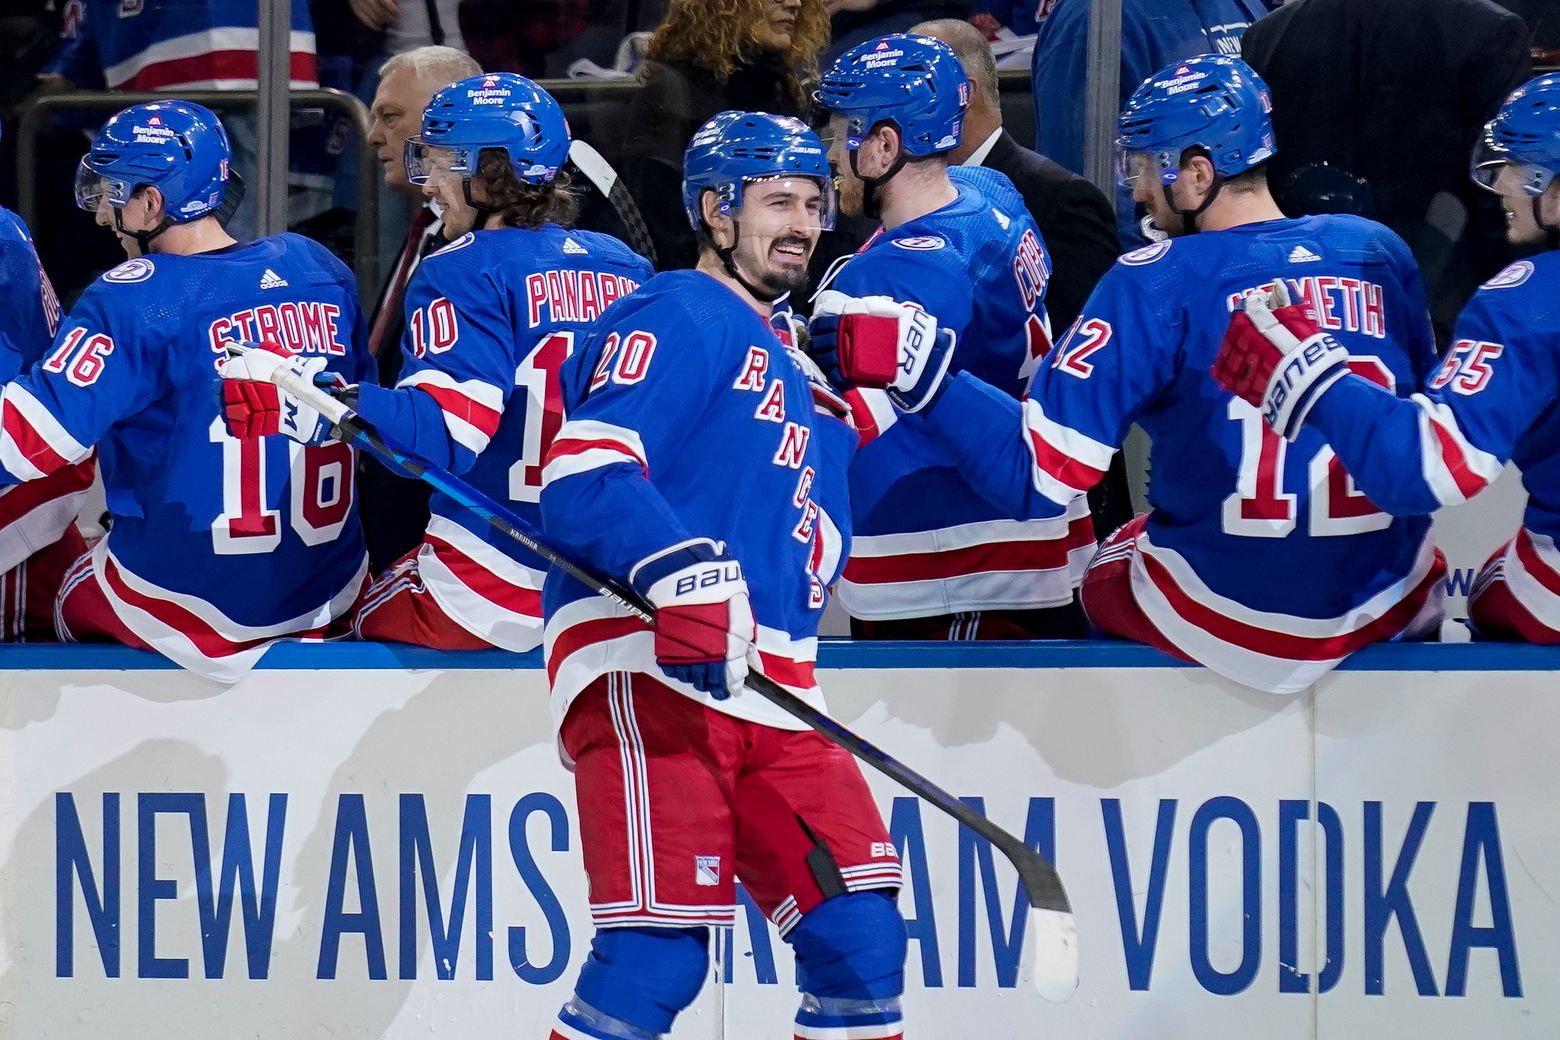 Rangers score 3 early goals, go on to rout Penguins 5-1